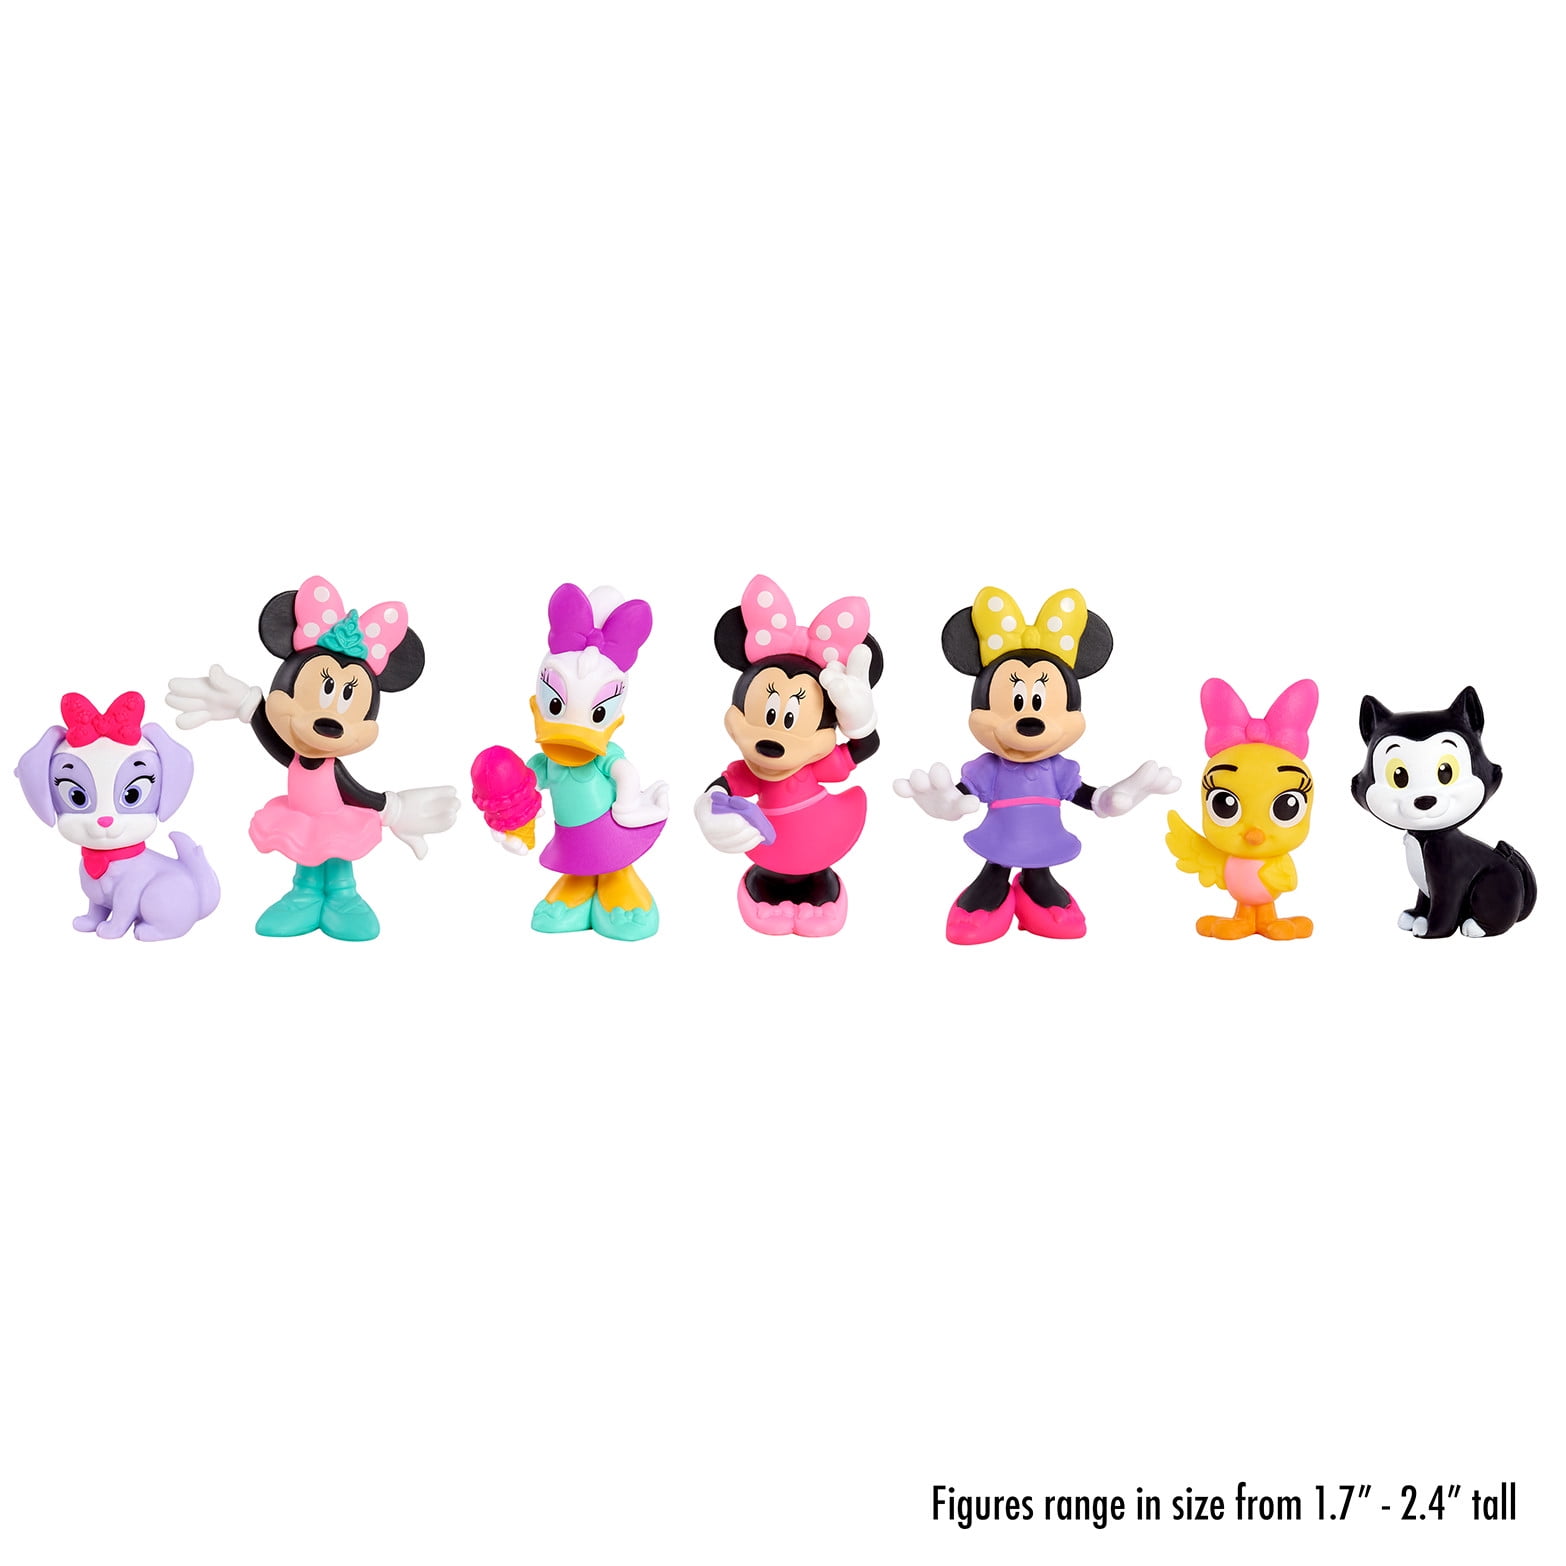 Disney Junior Mickey Mouse 7-Piece Figure Set, Kids Toys for Ages 3 Up, Size: 6.0 inches; 2.0 inches; 10.0 Inches